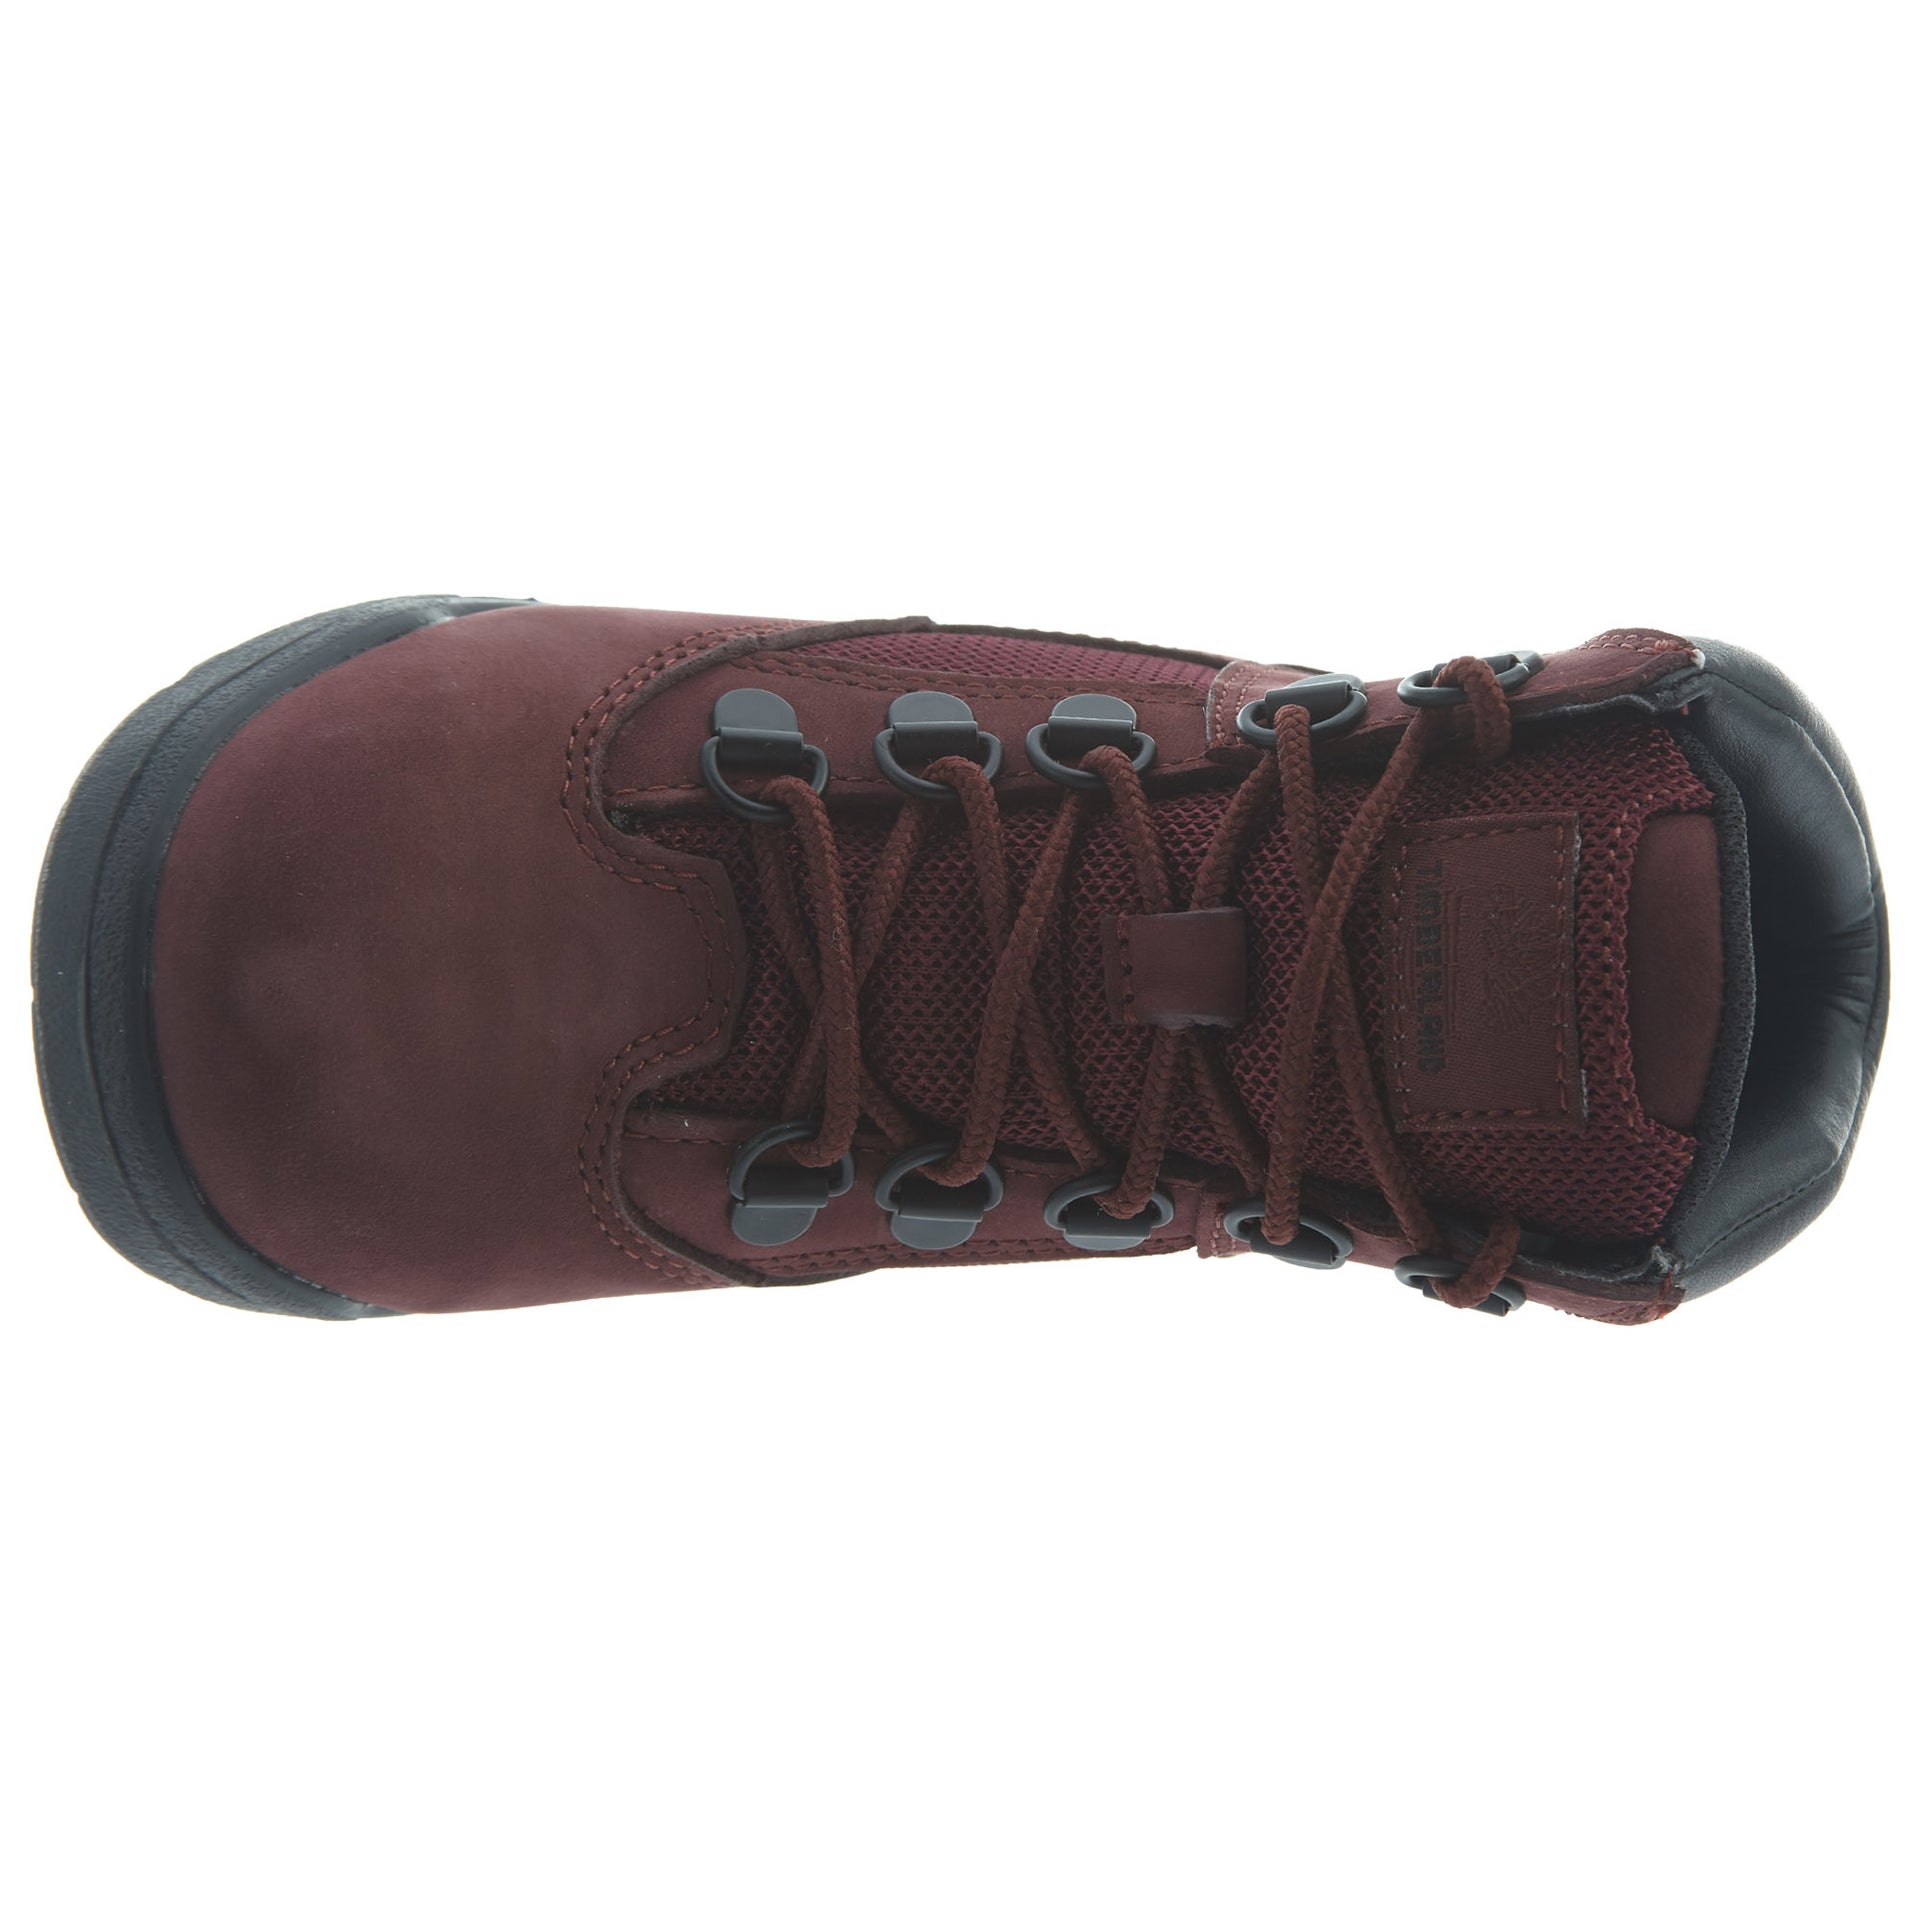 Timberland 6" Field Boots Toddlers Style : Tb0a1at2-Burgundy